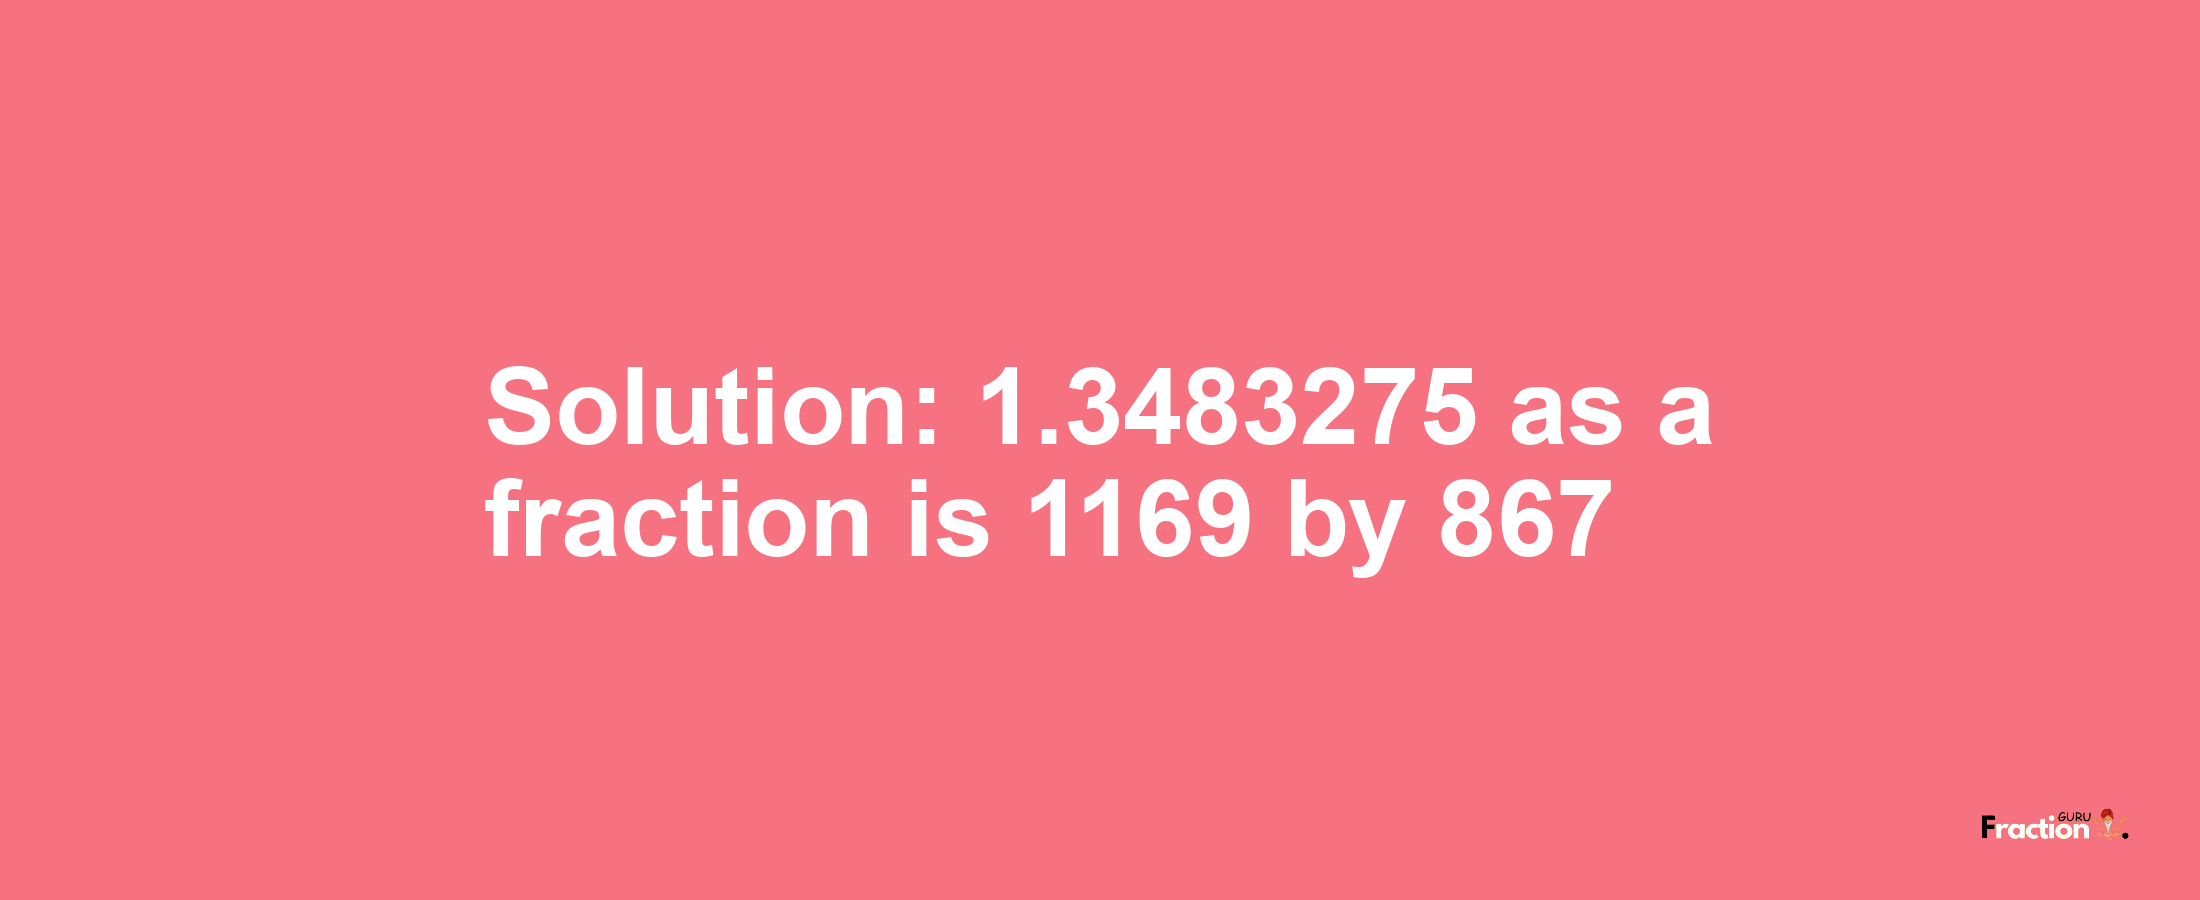 Solution:1.3483275 as a fraction is 1169/867